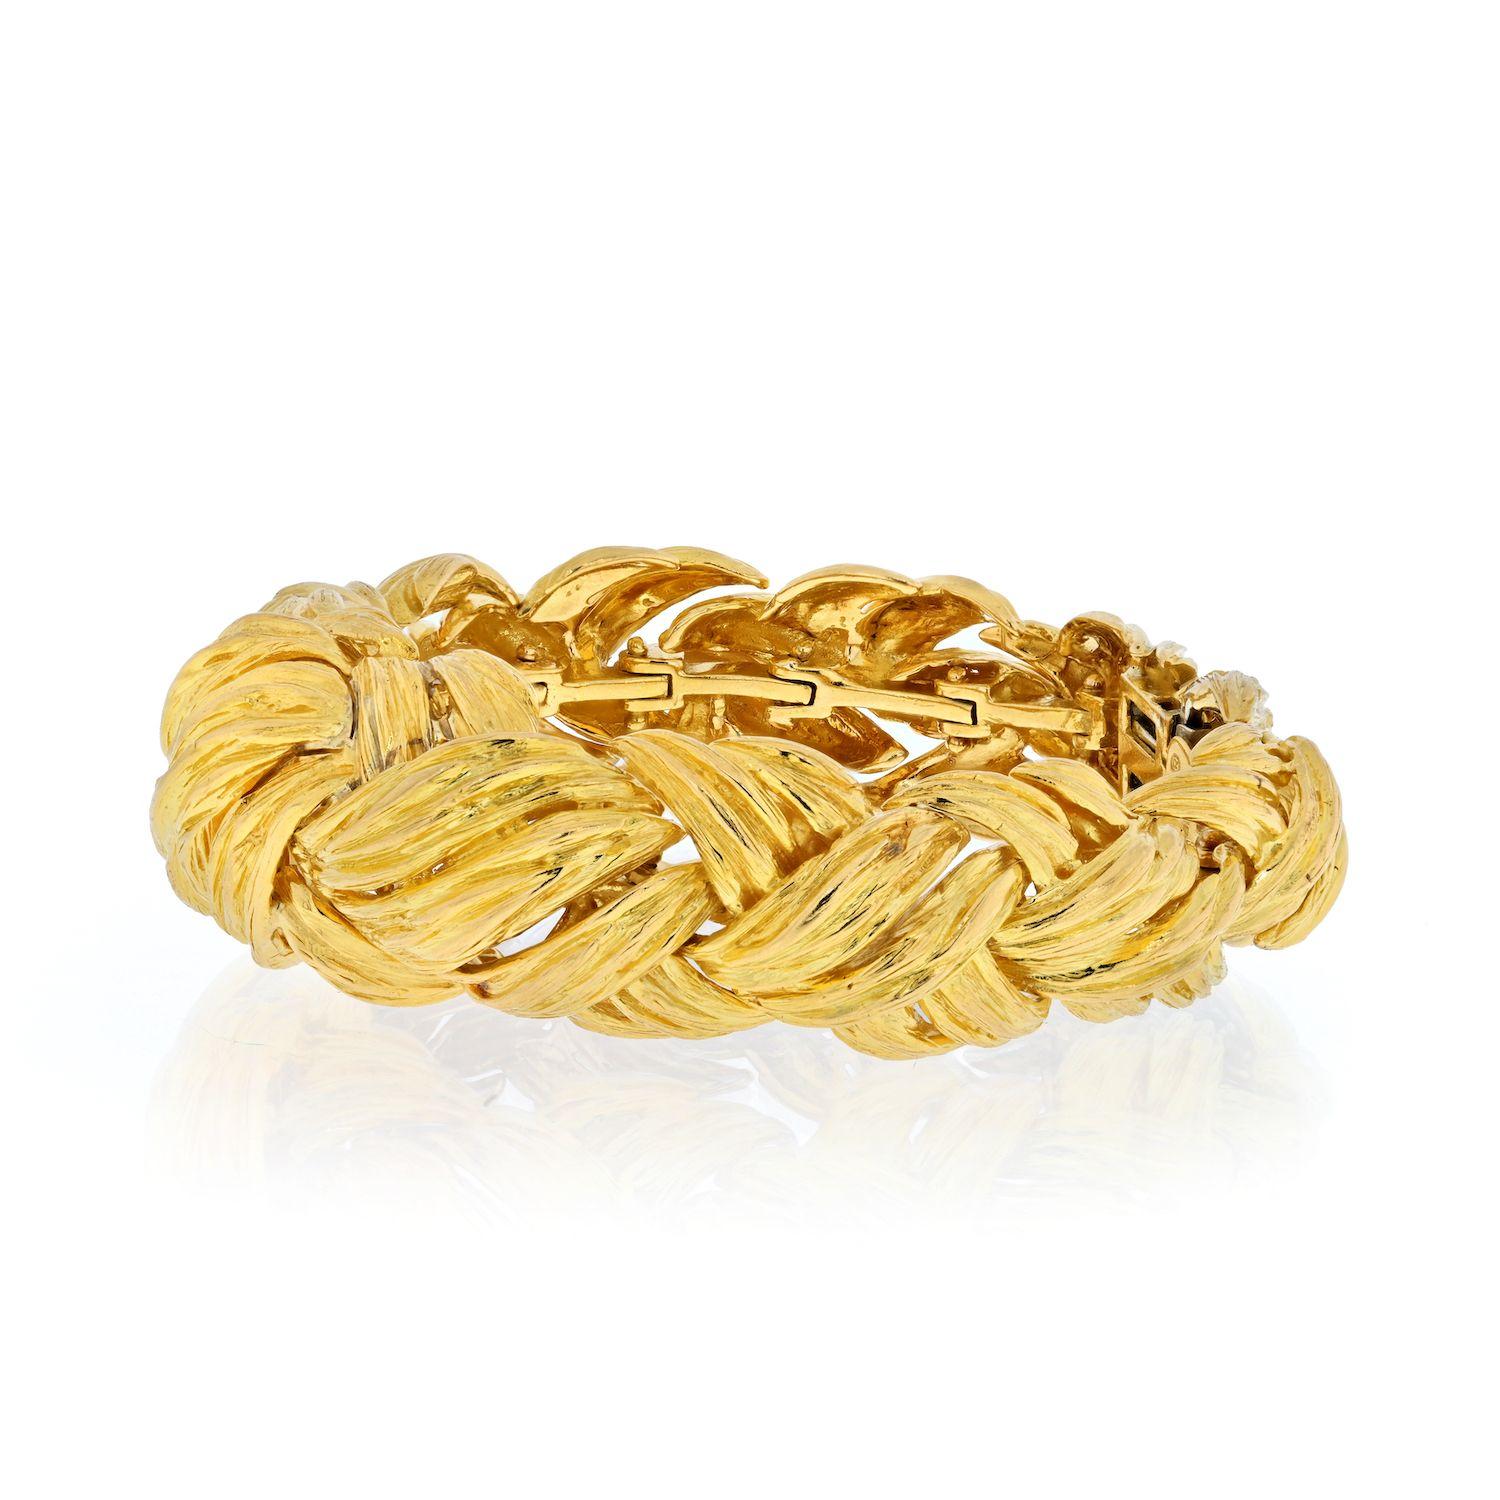 David Webb 18K Yellow Gold woven rope bracelet inner circumference 6.5 inches. 
This classic gold power bracelet features iconic David Webb architectural interest with its interwoven yellow gold detail. Mix it with lots of yellow gold for a festive